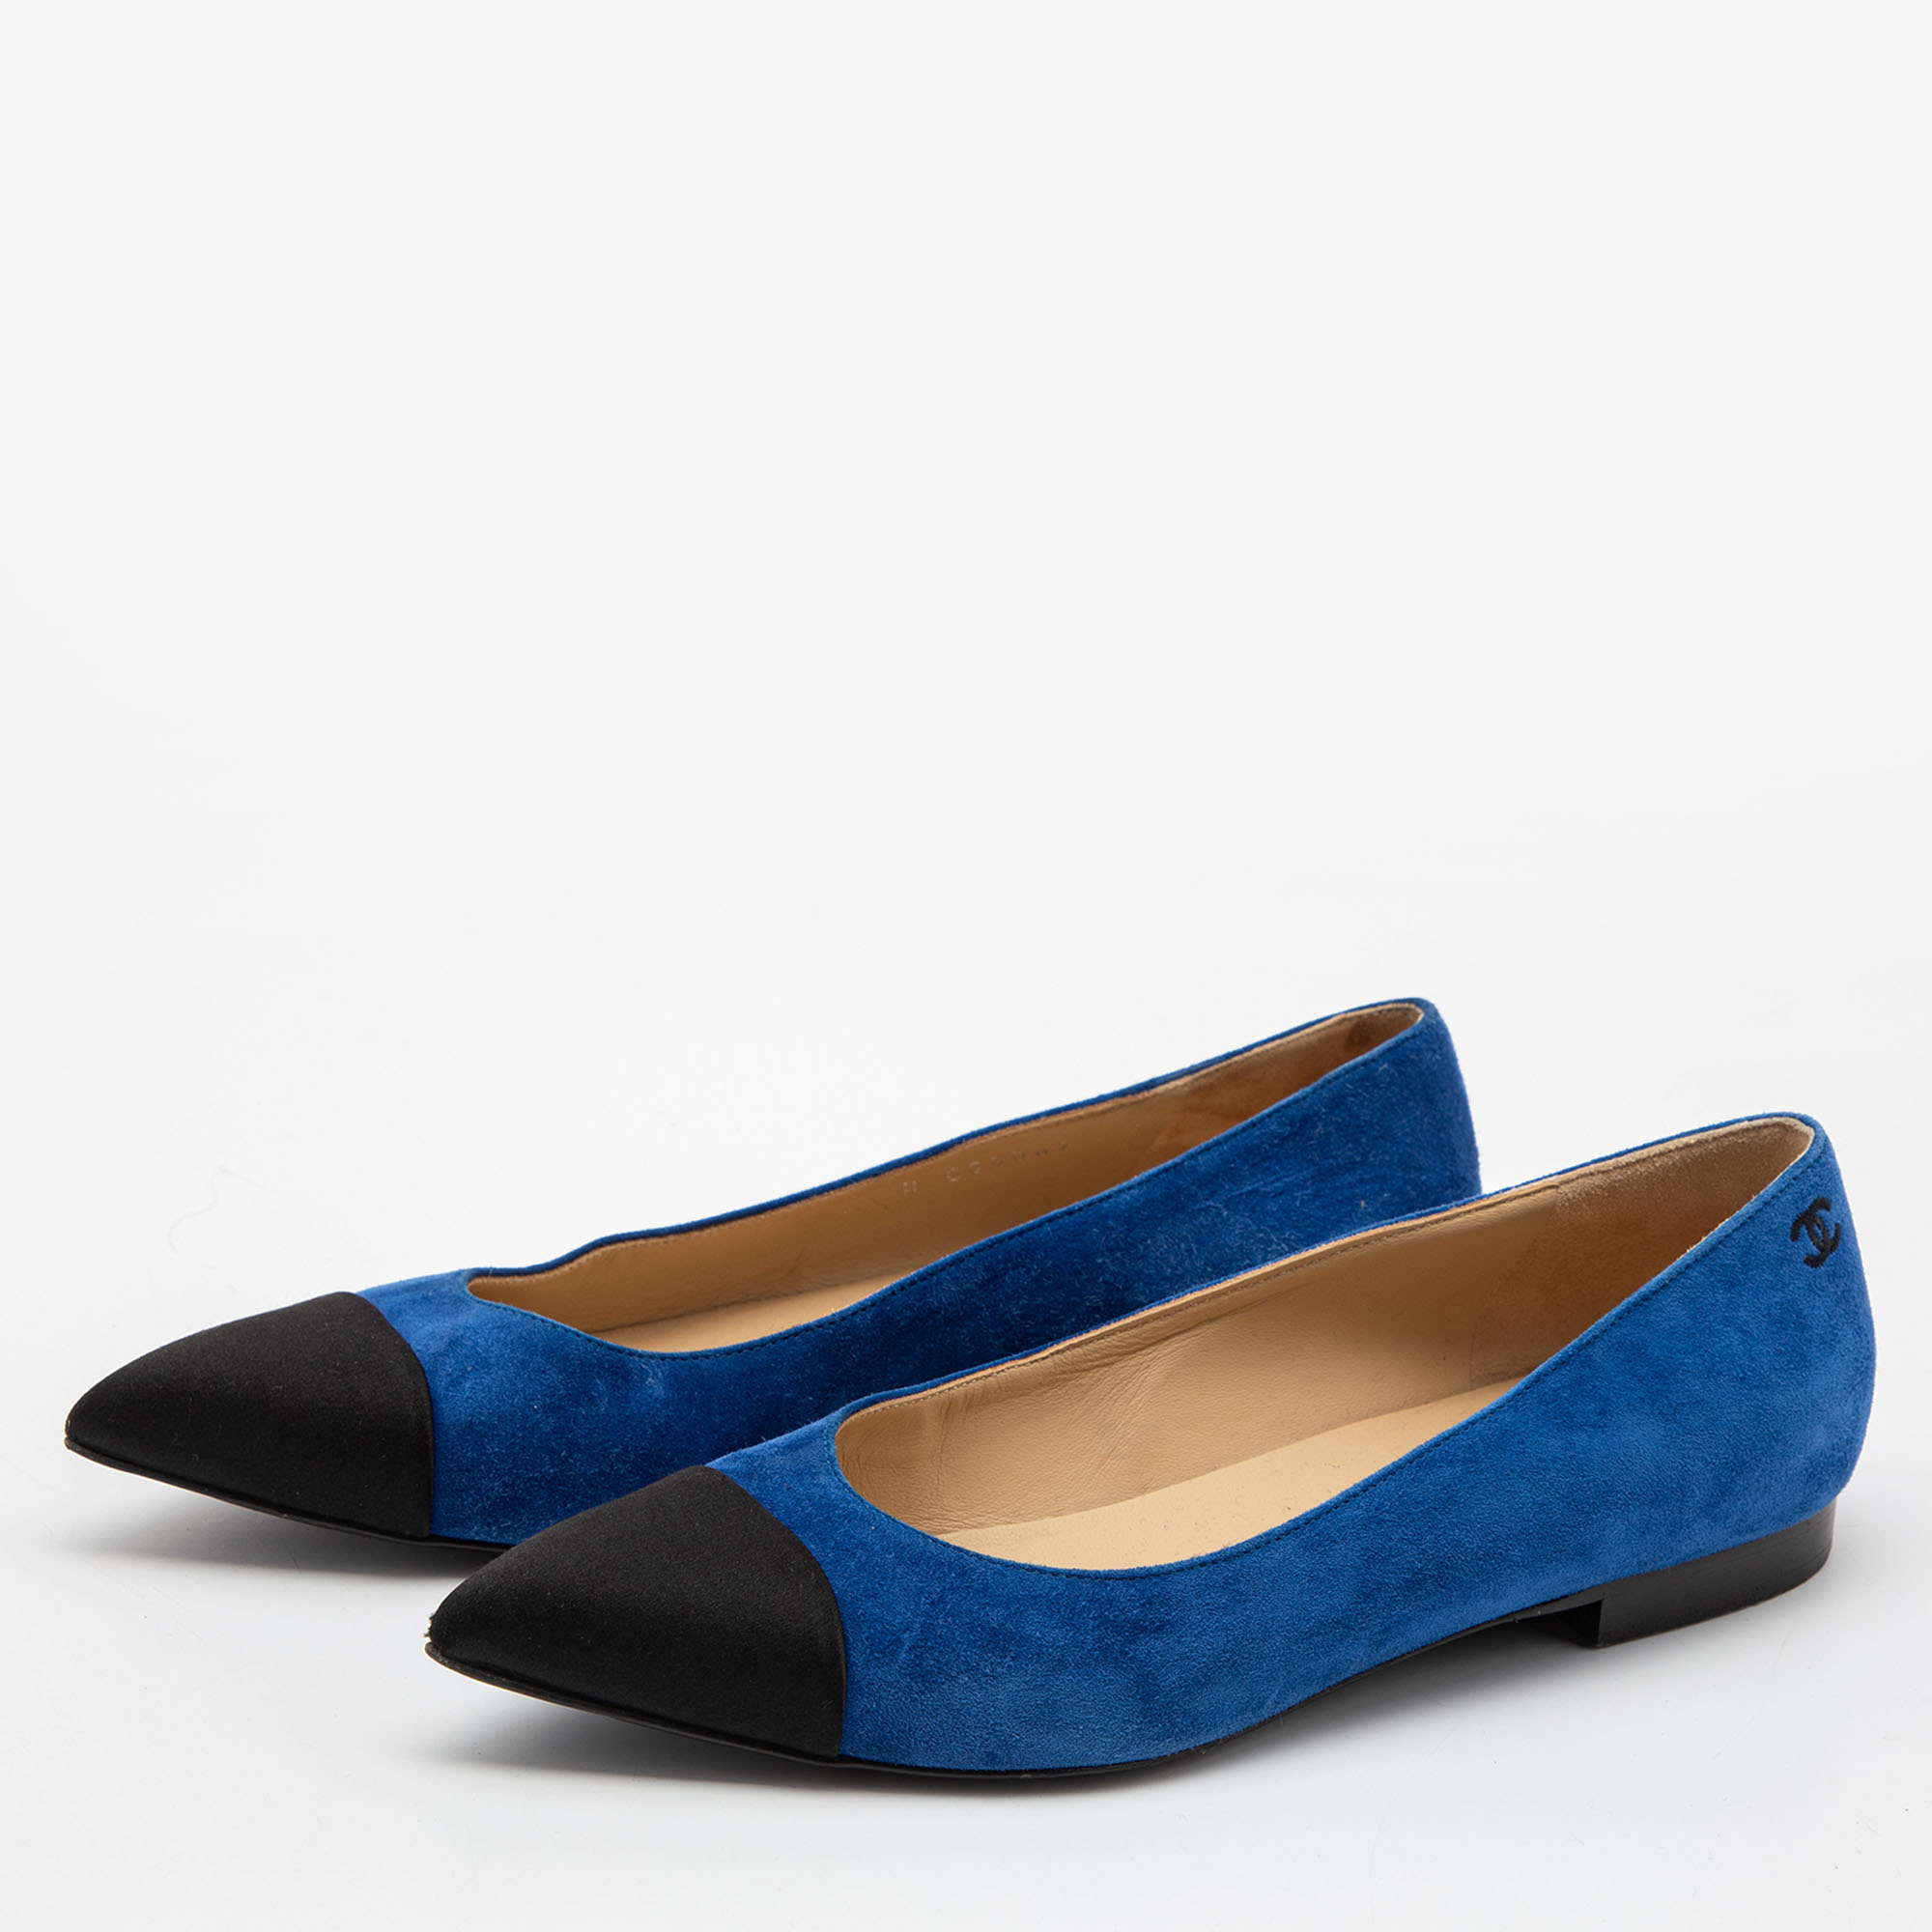 Chanel Blue/Black Satin and Suede Pointed Toe Gabrielle Ballerina Flats Size 37  - buy with discount